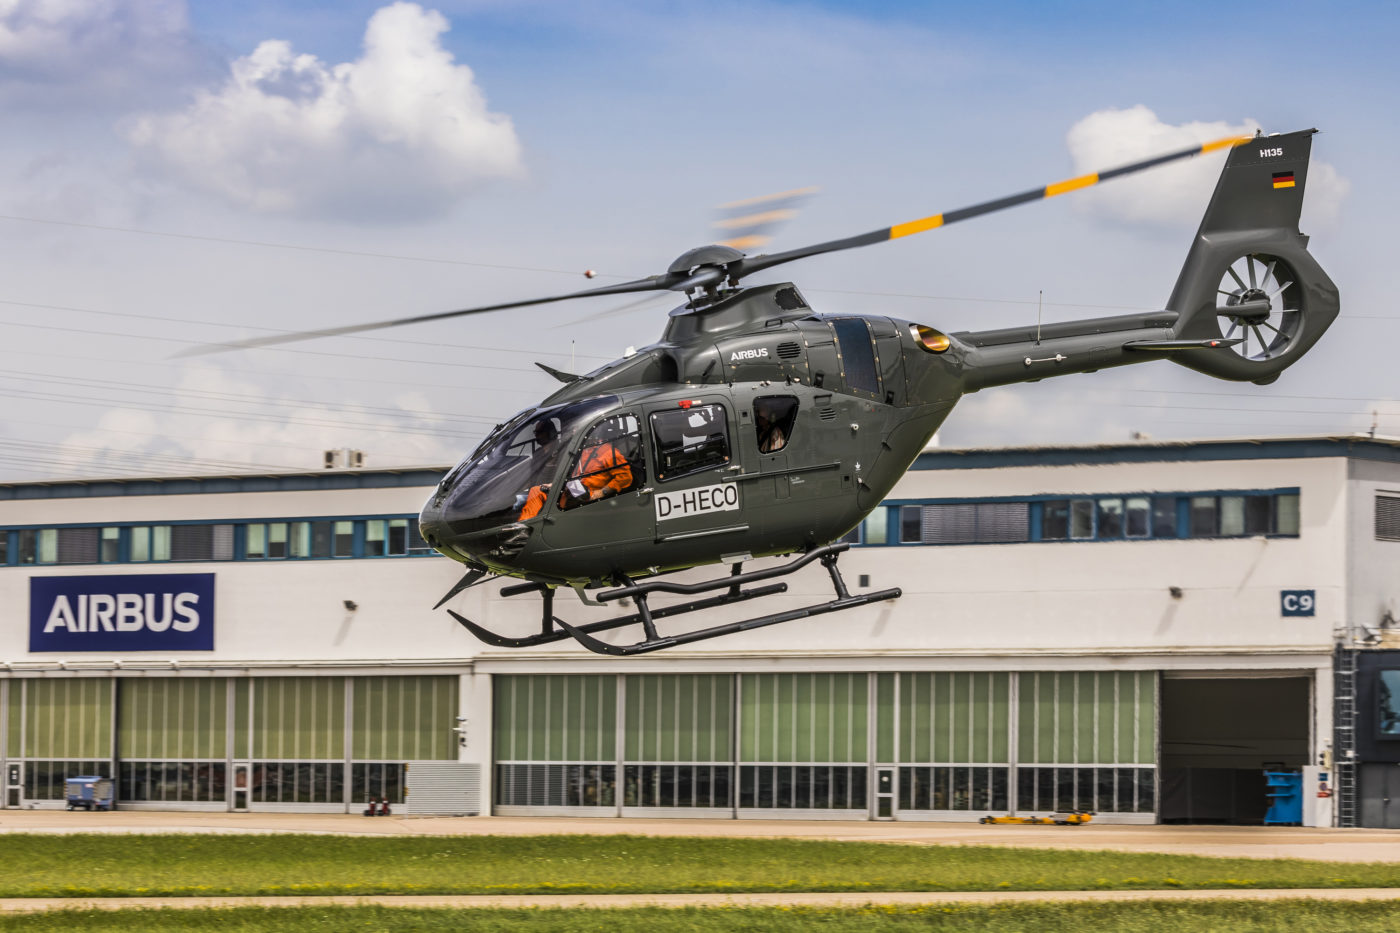 The five H135s join 14 others from the H135 family, which have been in service for training at the Bundeswehr since 2000.